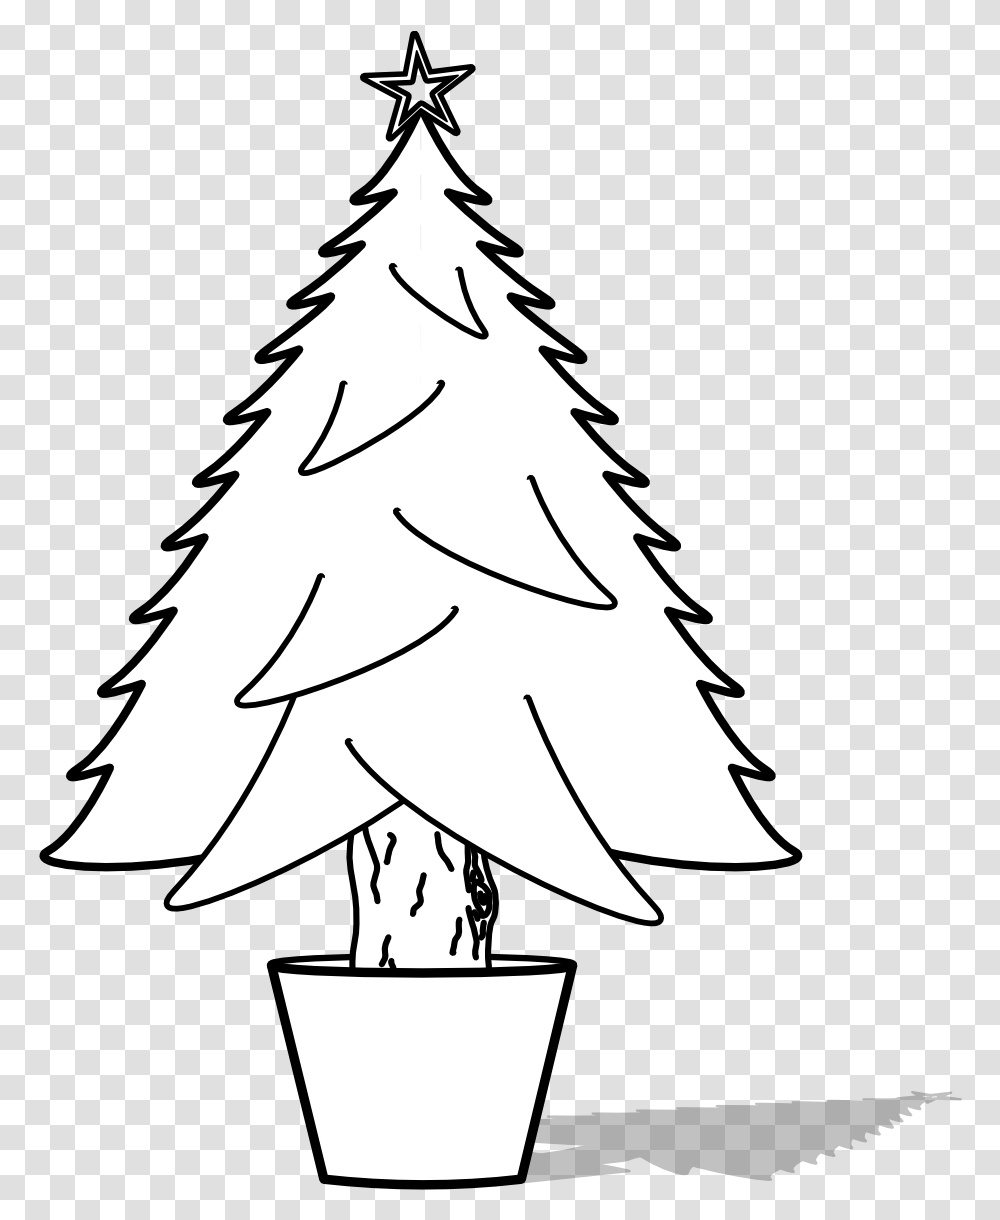 Christmas Tree Clip Art Black And White Christmas Tree, Plant, Person, Human, Star Symbol Transparent Png